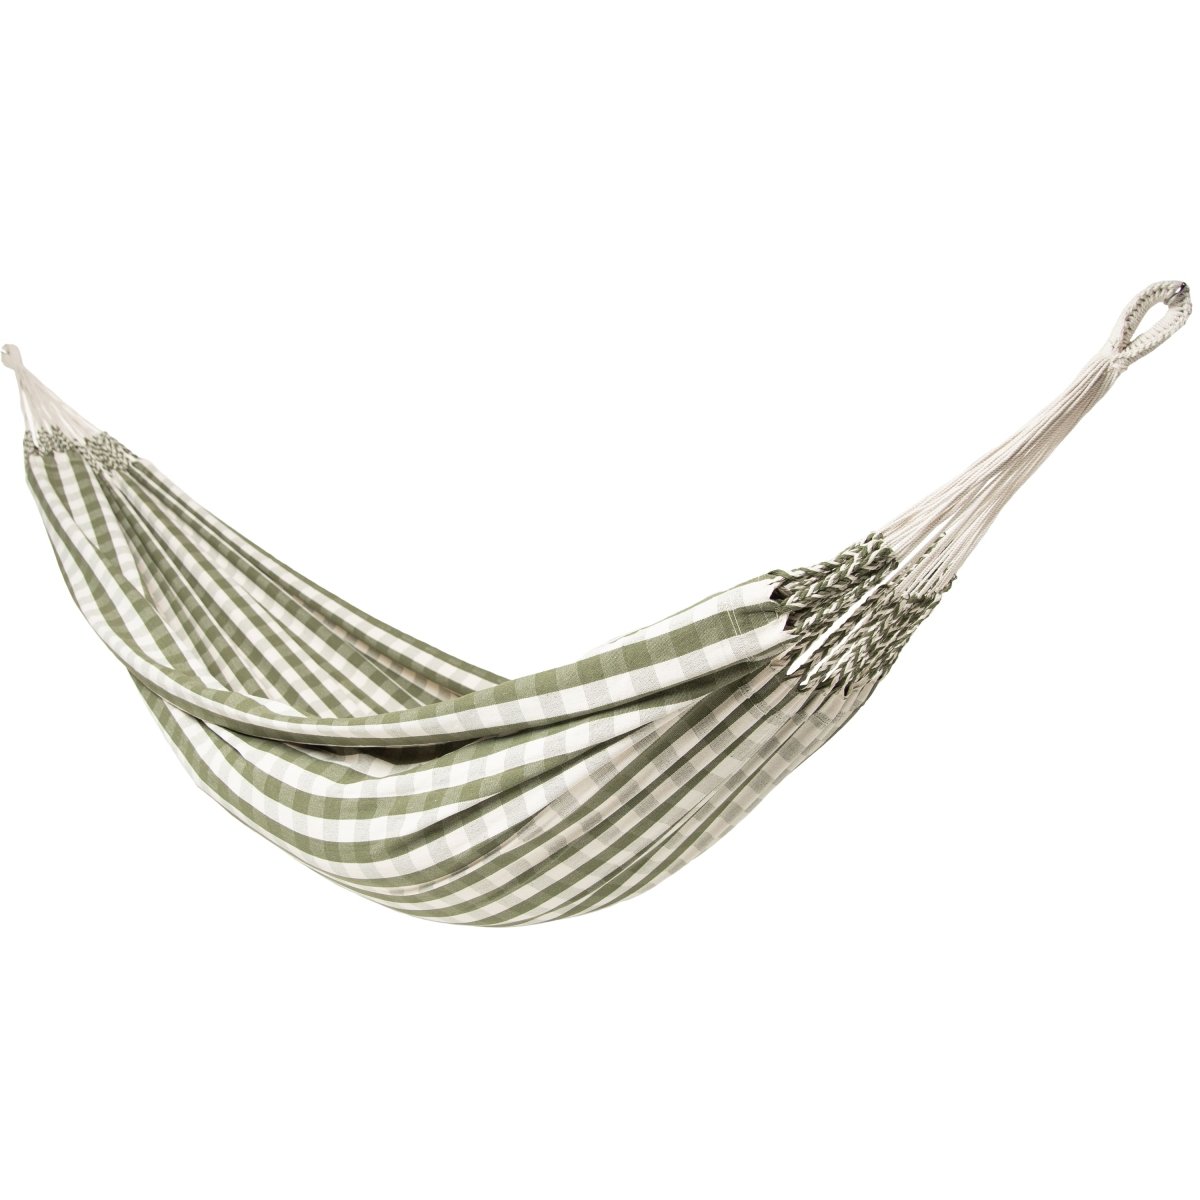 Authentic Double Vichy Hammock in Urban Olive - Outdoorium